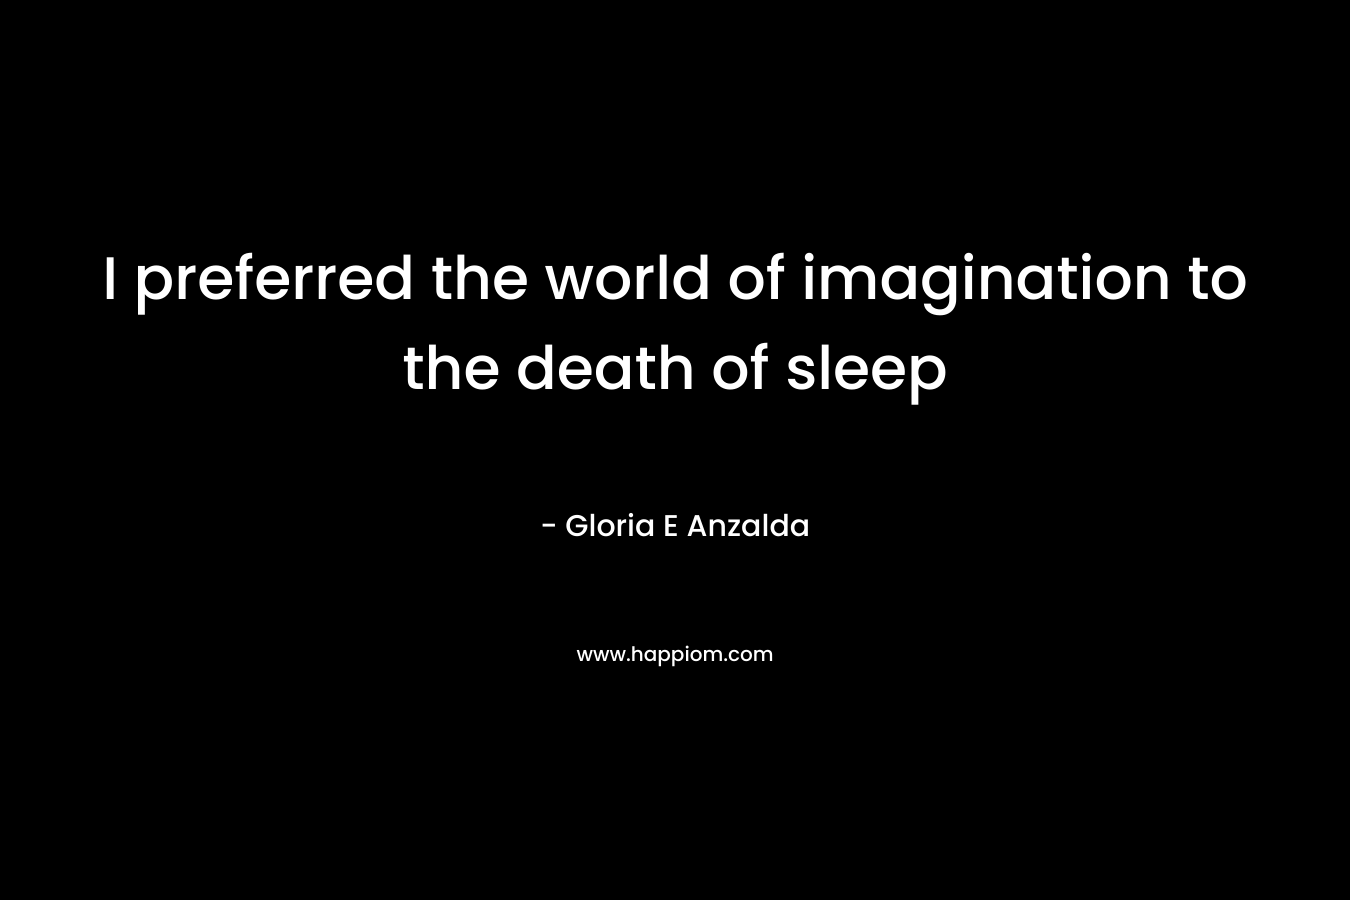 I preferred the world of imagination to the death of sleep